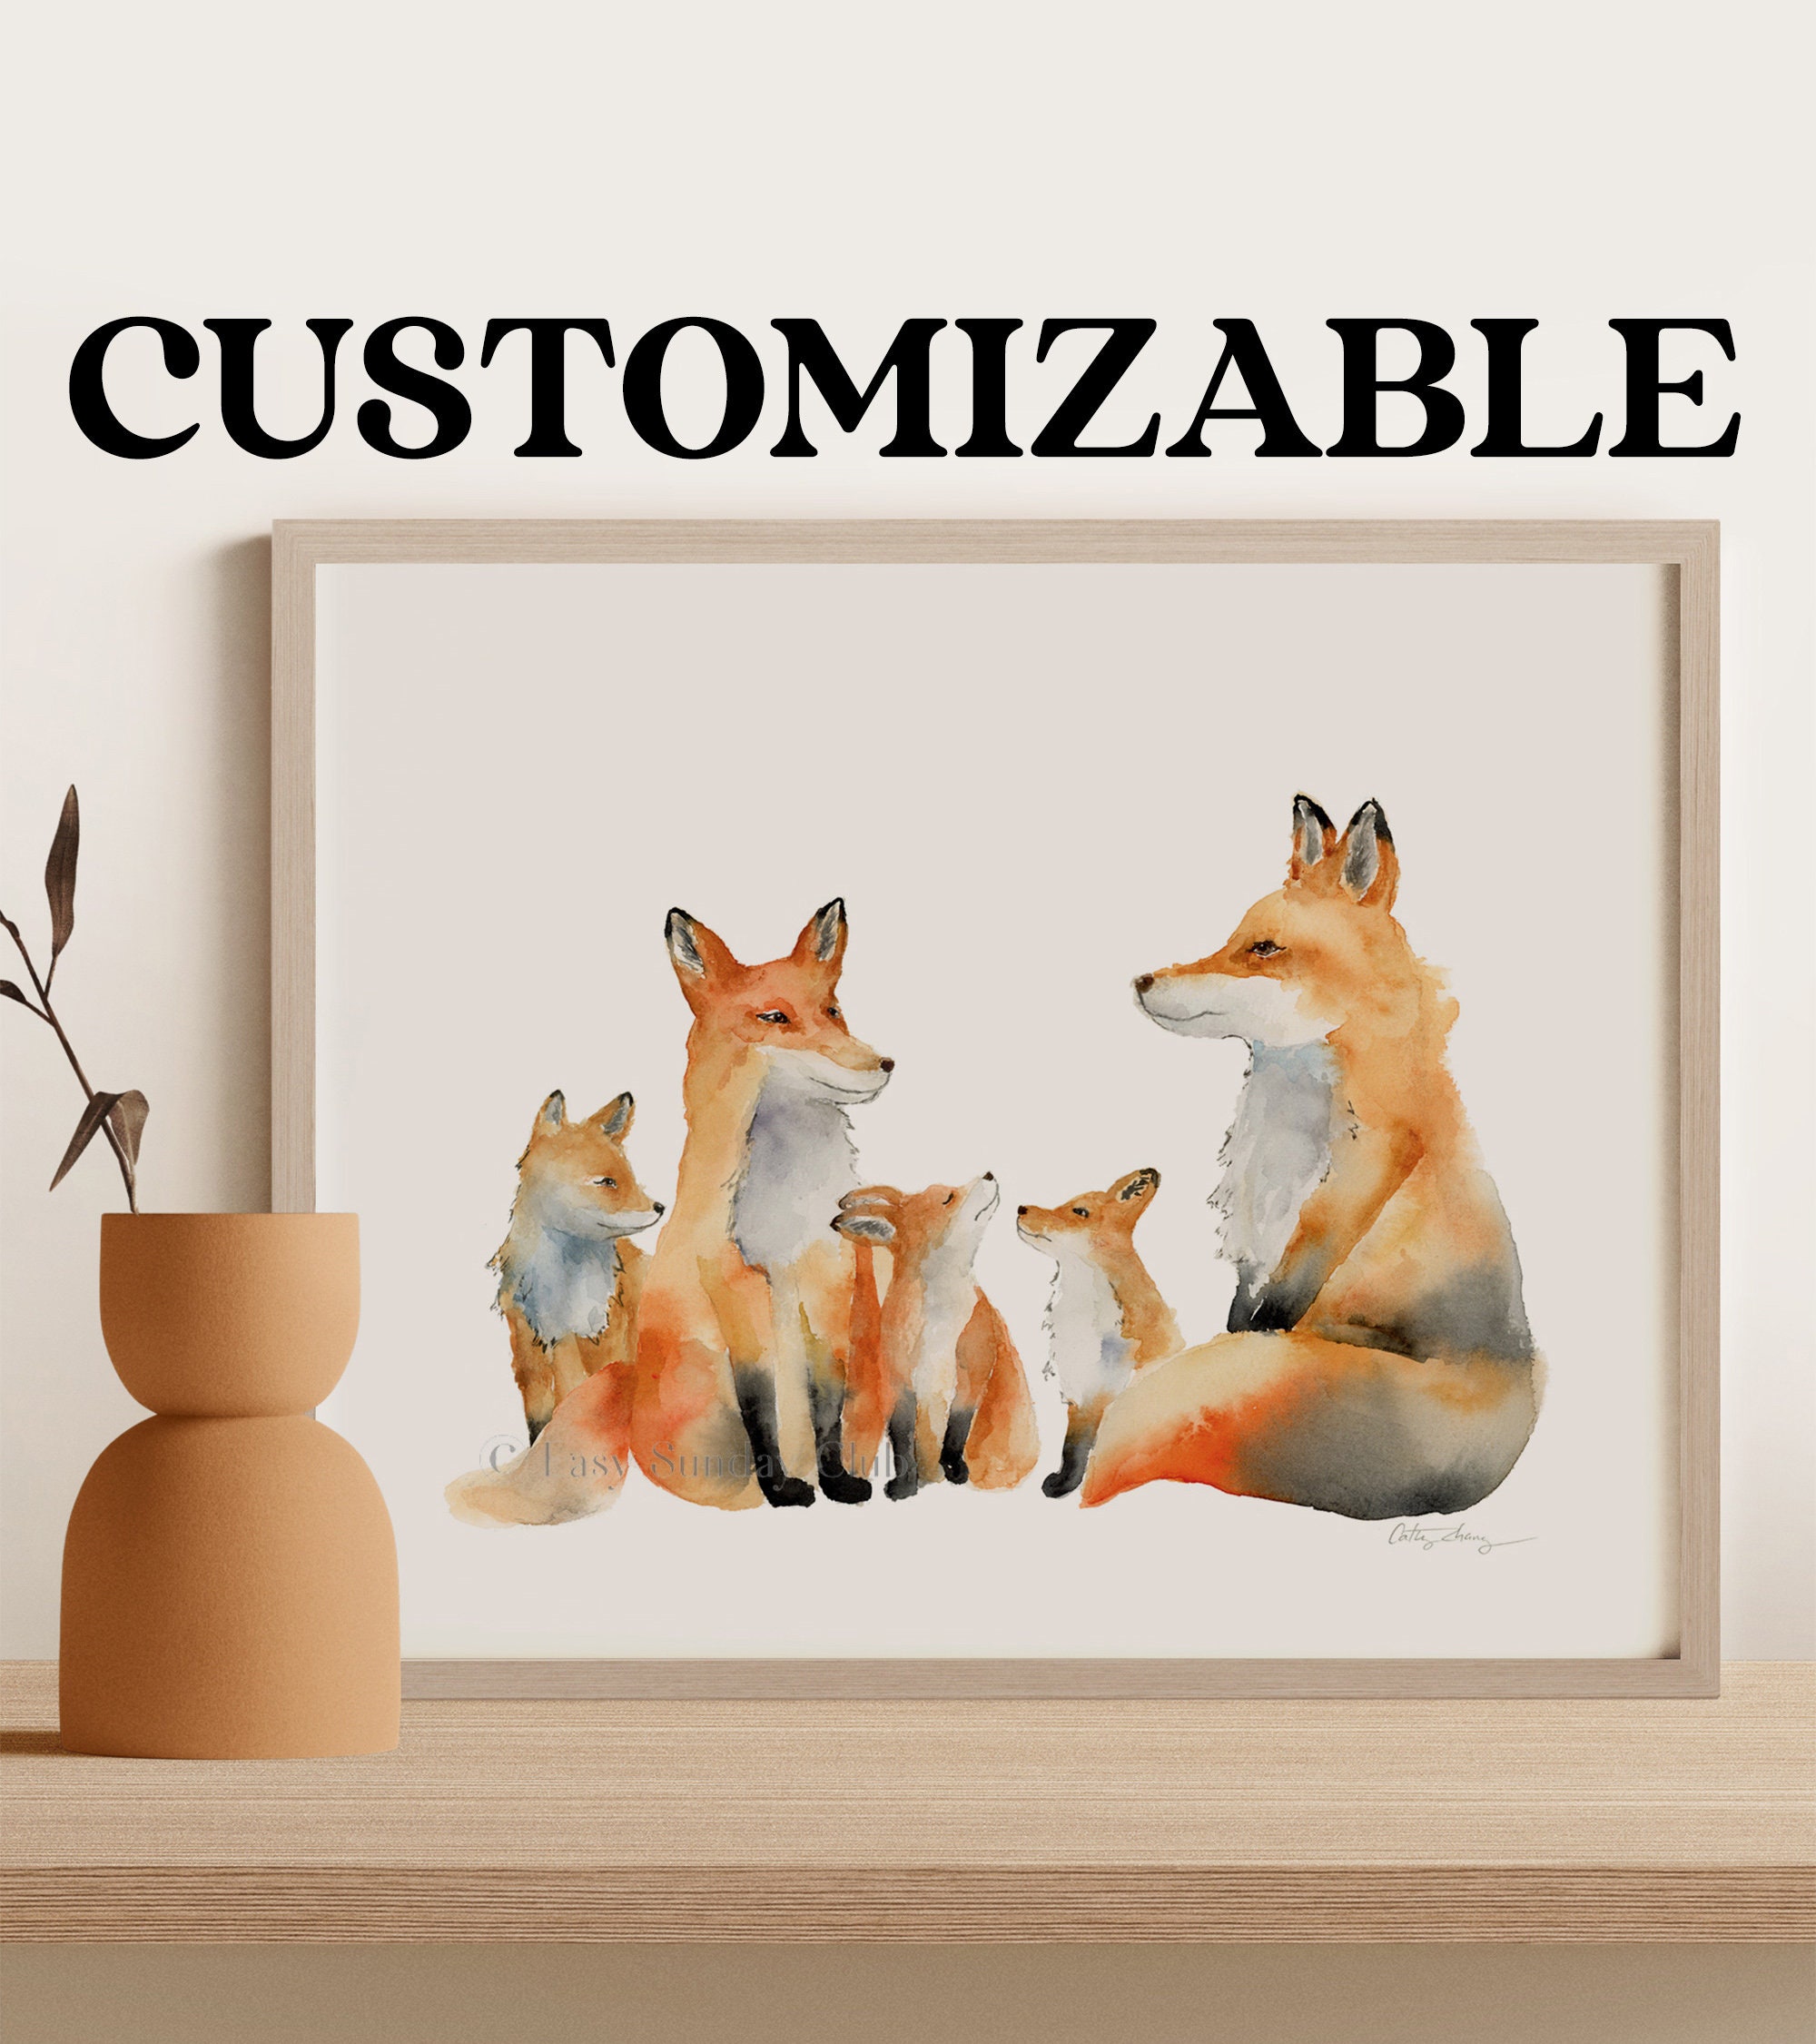 Fox Family Portrait Print With Any Names, Mothers Day Gifts for Mum,  Personalised Birthday Present for Mother in Law 